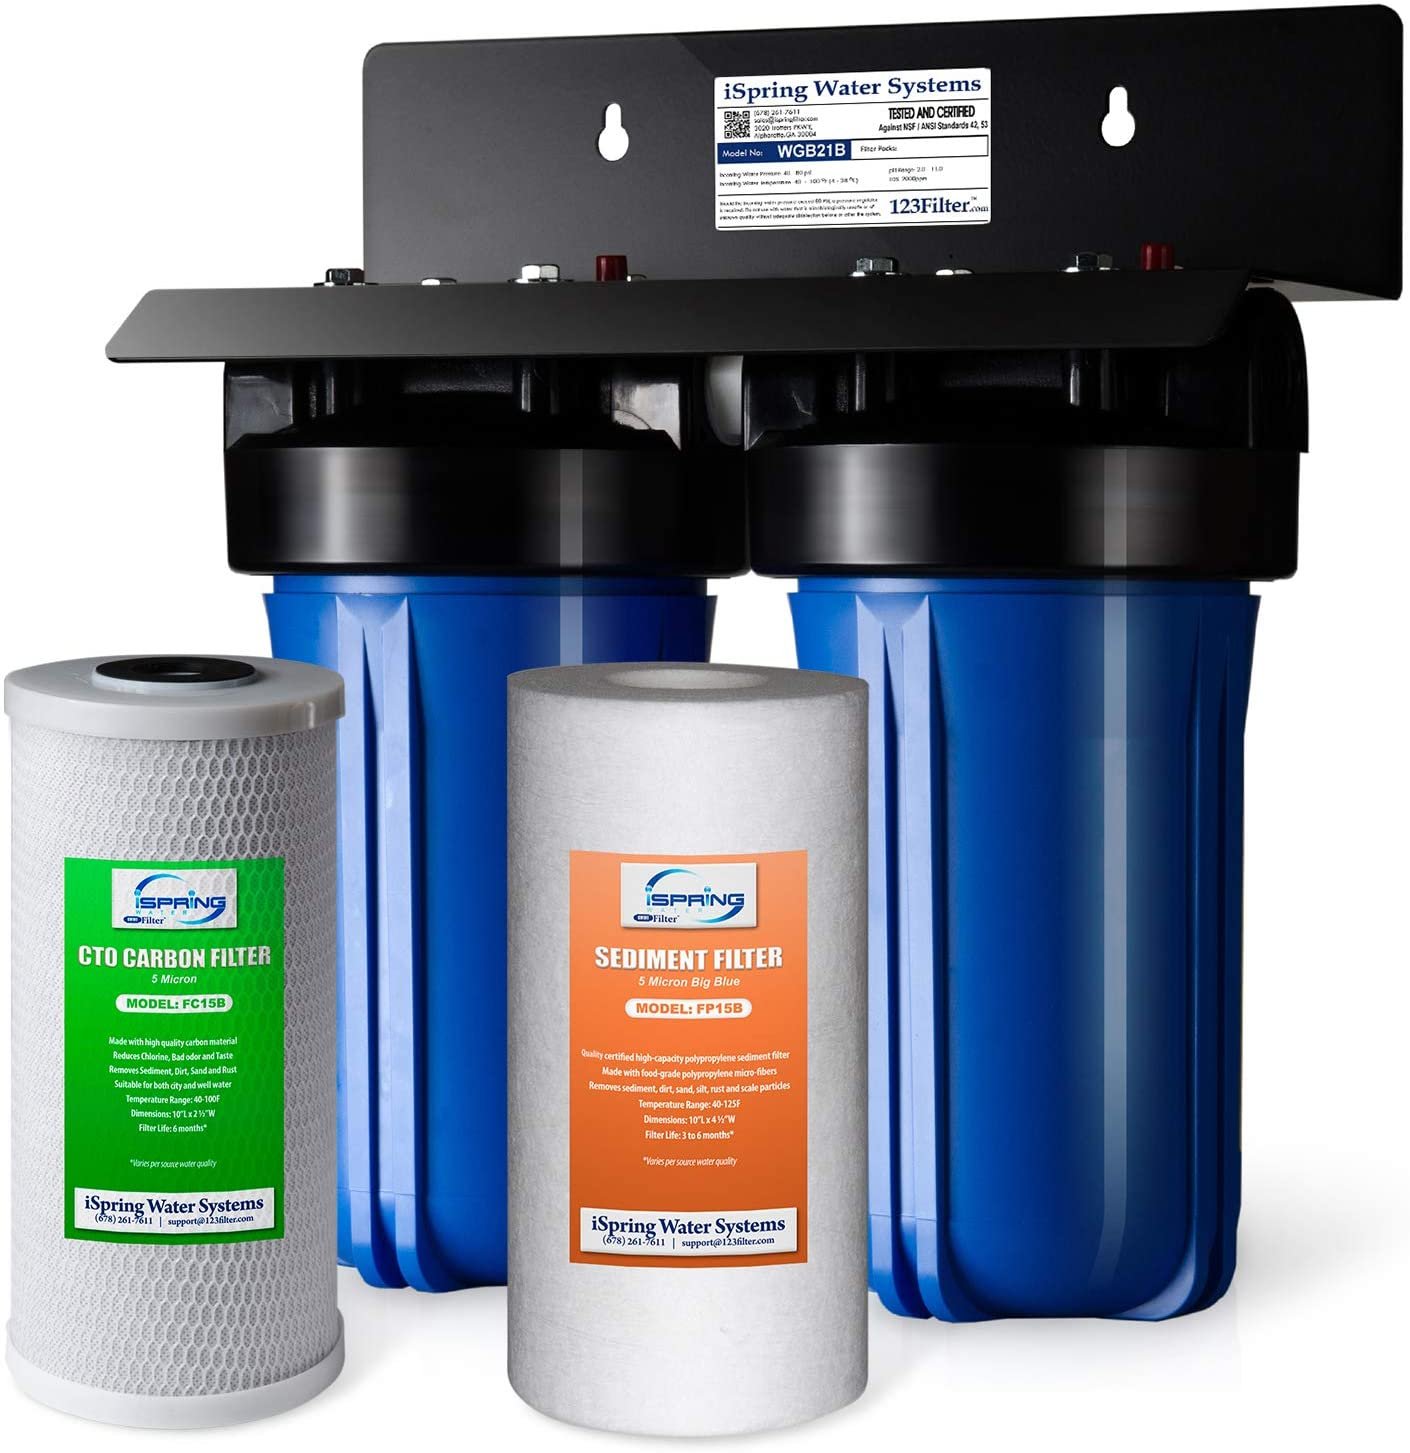 iSpring whole house water filtration system